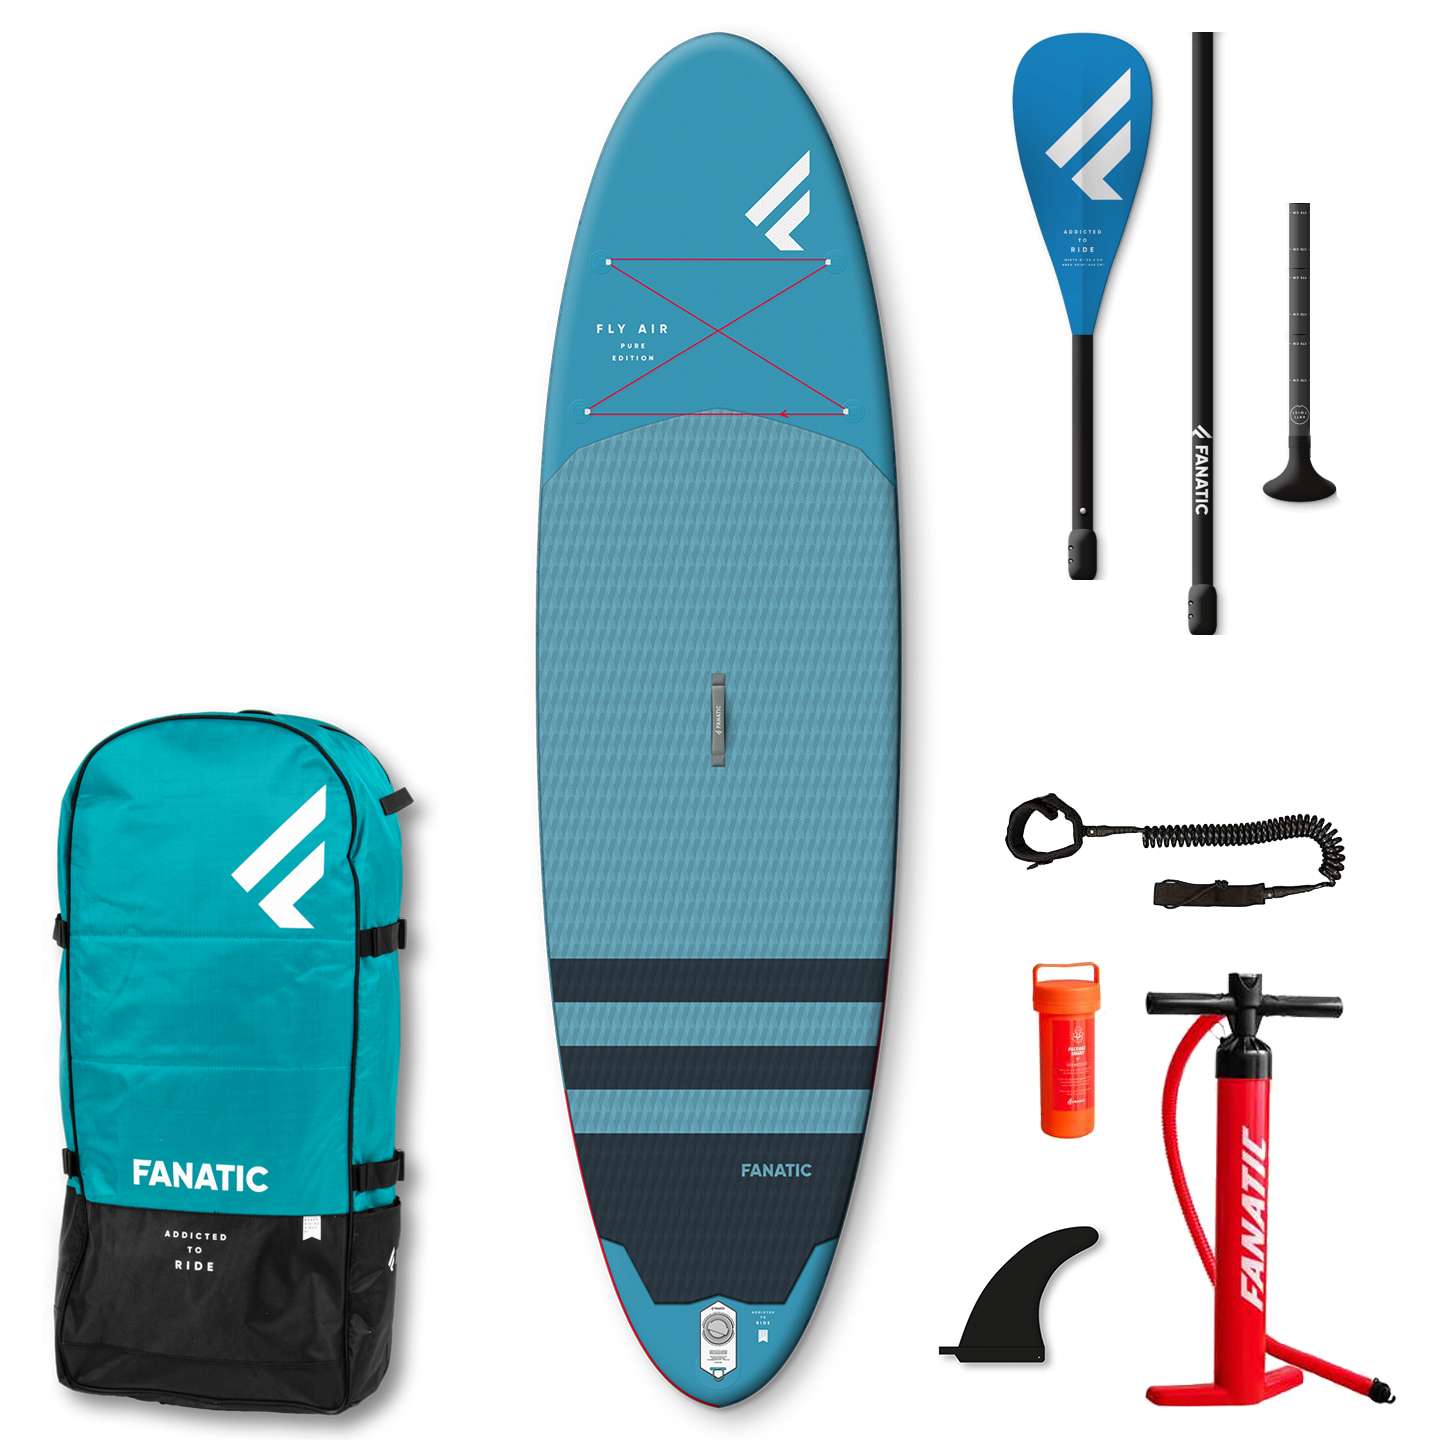 Fanatic Fly Air Pure inflatable SUP 9.8 Stand up Paddle Board Carbon Guide 295cm 